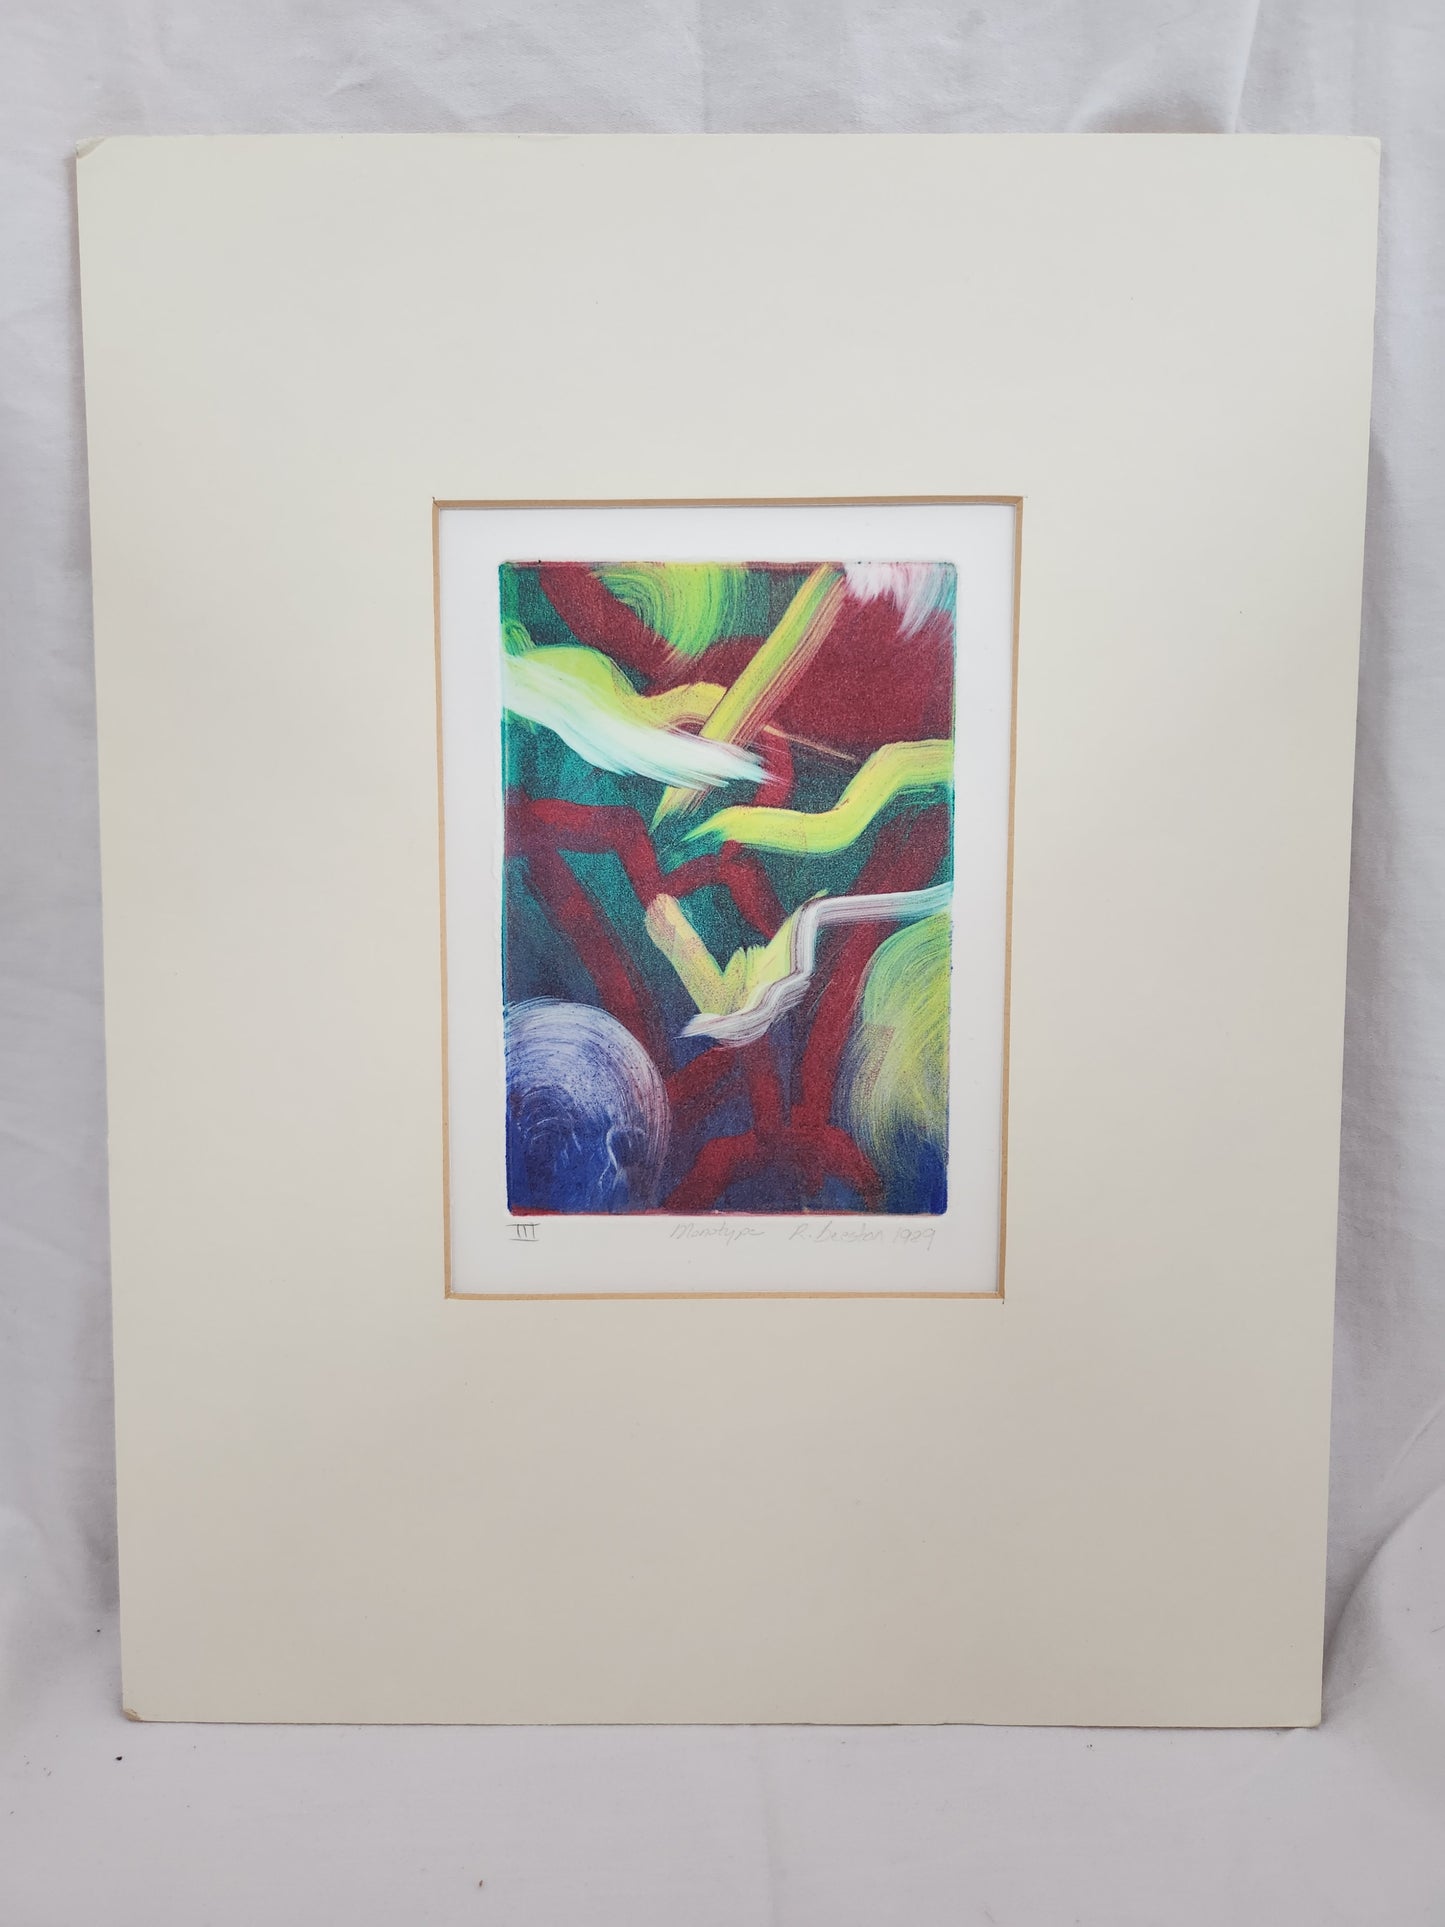 R. Beeston 4"x5-3/4" Monotype Signed by Artist 1989 - Matted